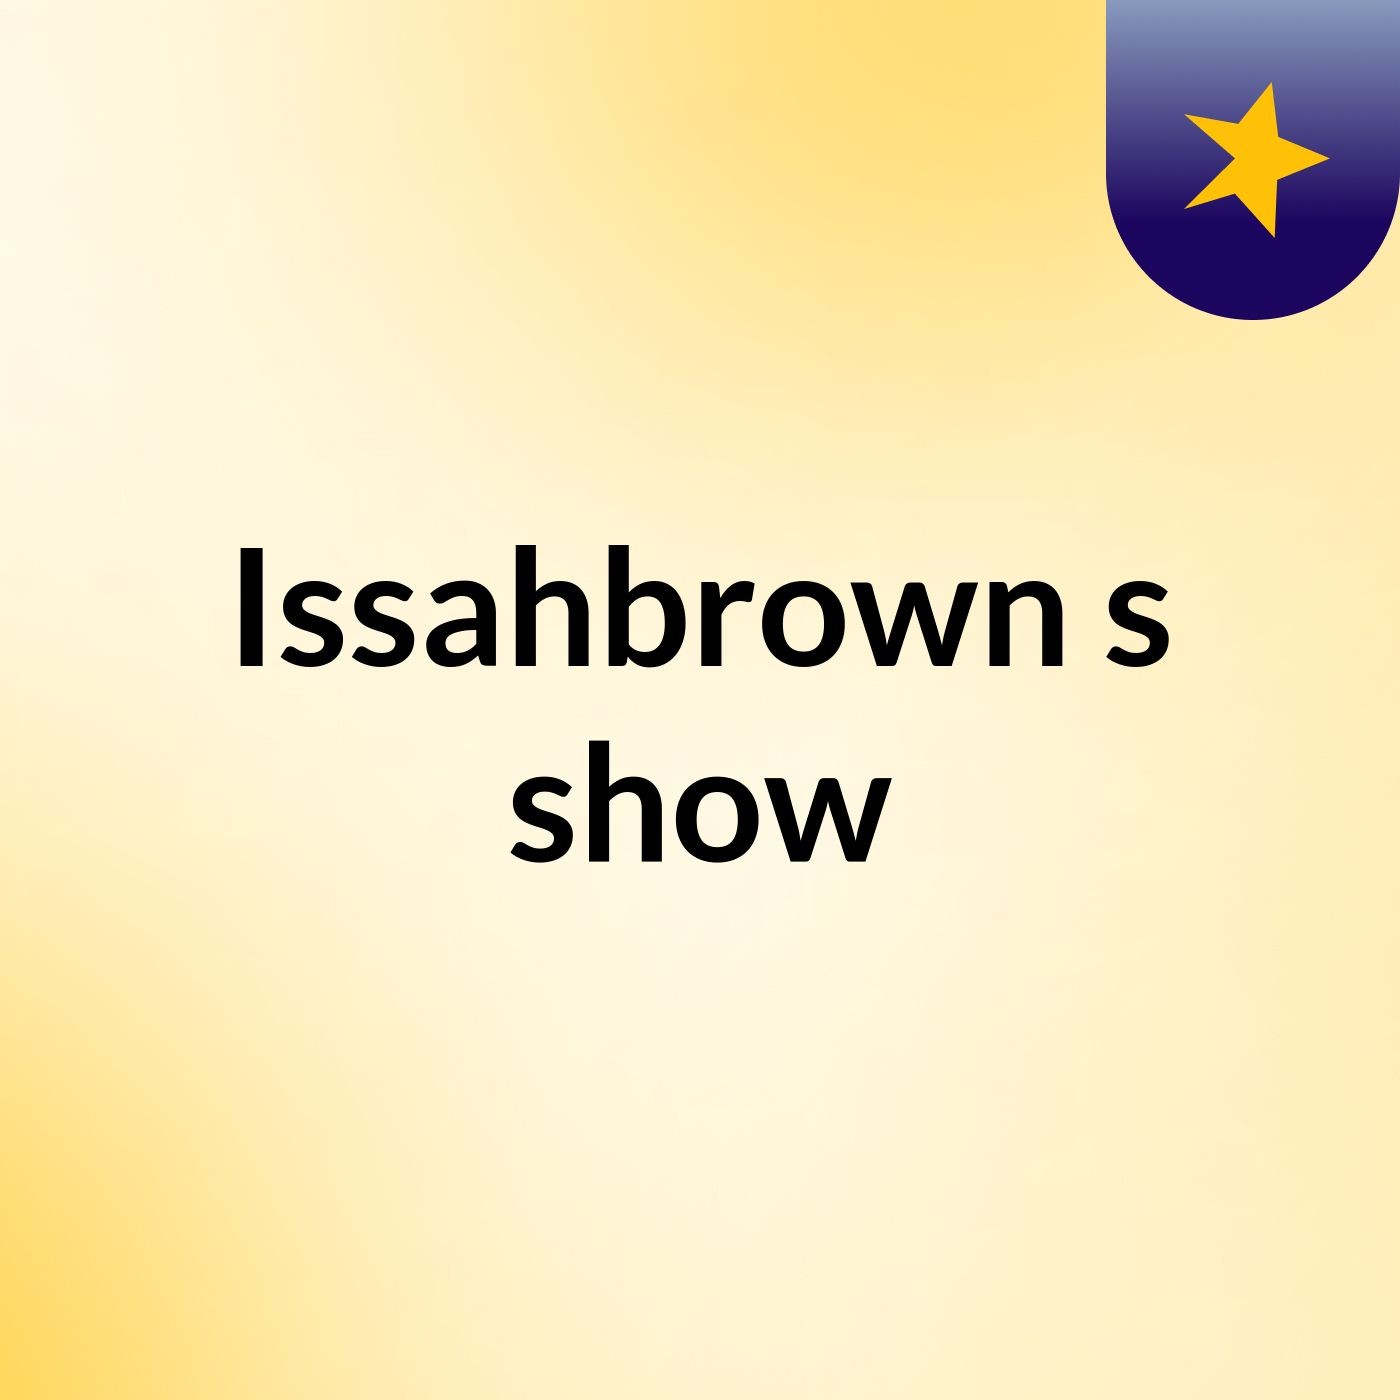 Issahbrown's show